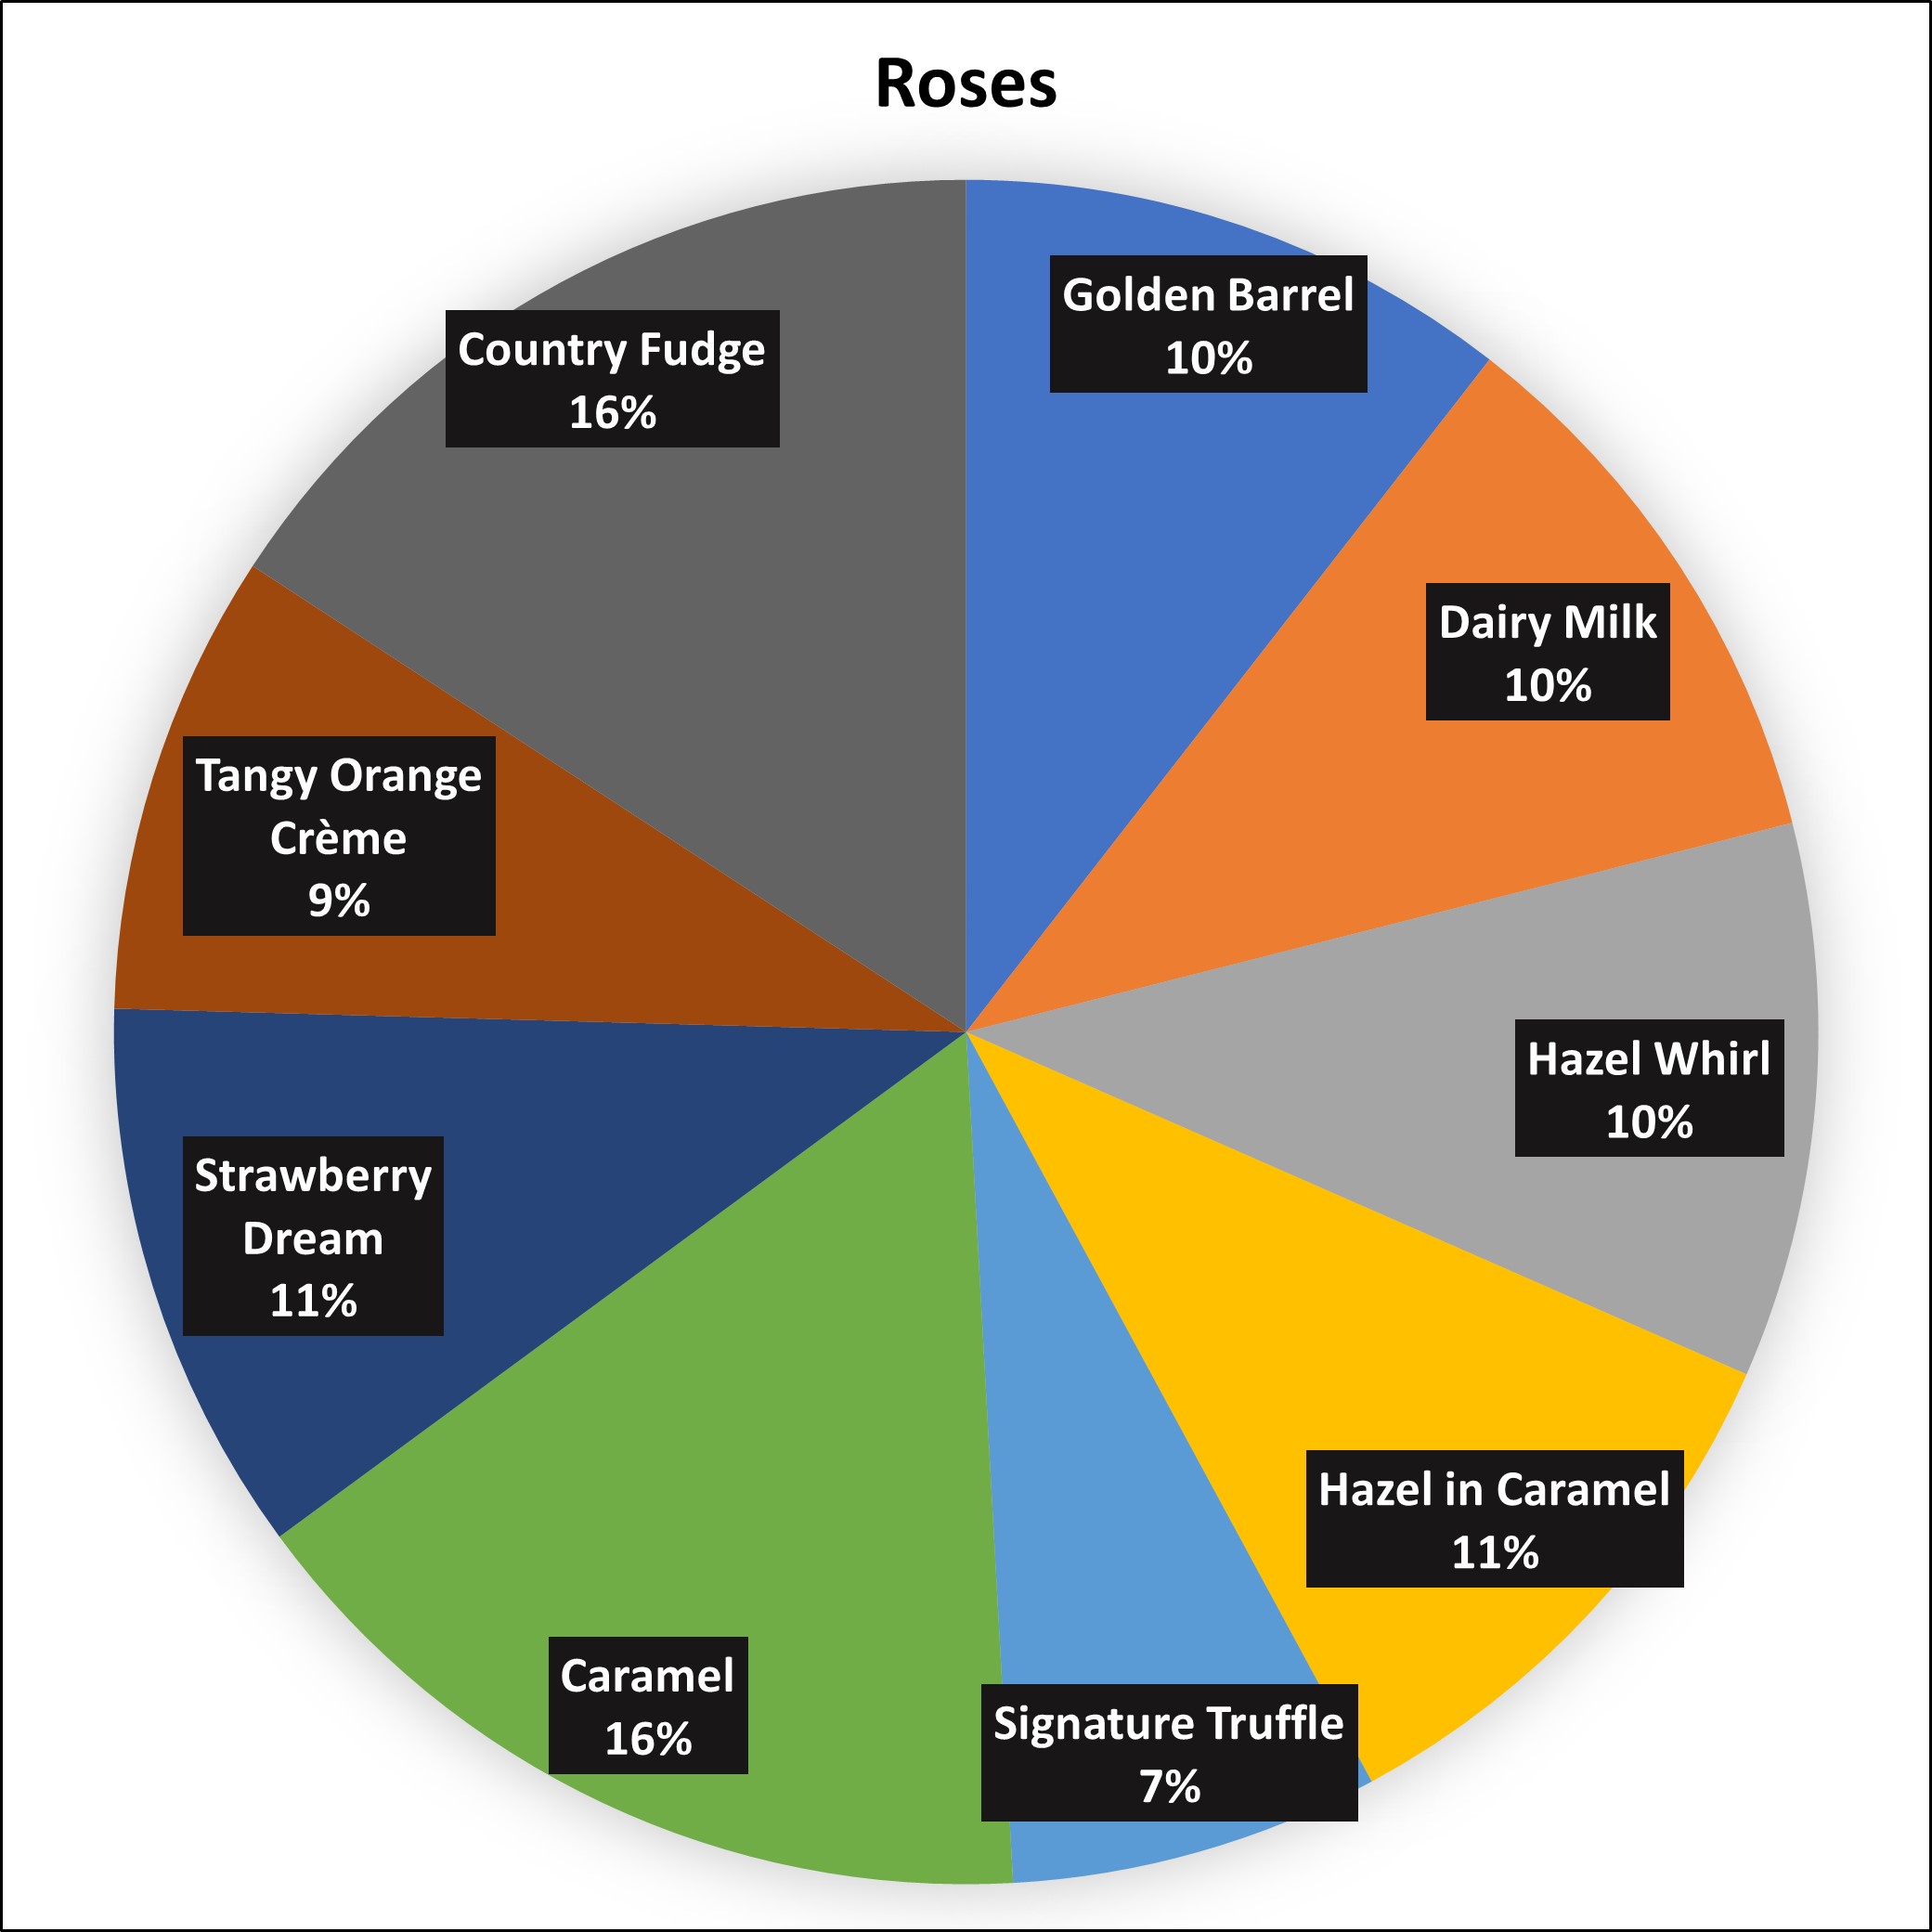 A pie chart showing the contents of a tin of Roses. It shows that the average box is made up of; 10% Golden Barrel, 10% Dairy Milk, 10% Hazel Whirl, 11% Hazel in Caramel, 7% Signature Truffle, 16% Caramel, 11% Strawberry Dream, 9% Tangy Orange Creme, 16% Country Fudge.